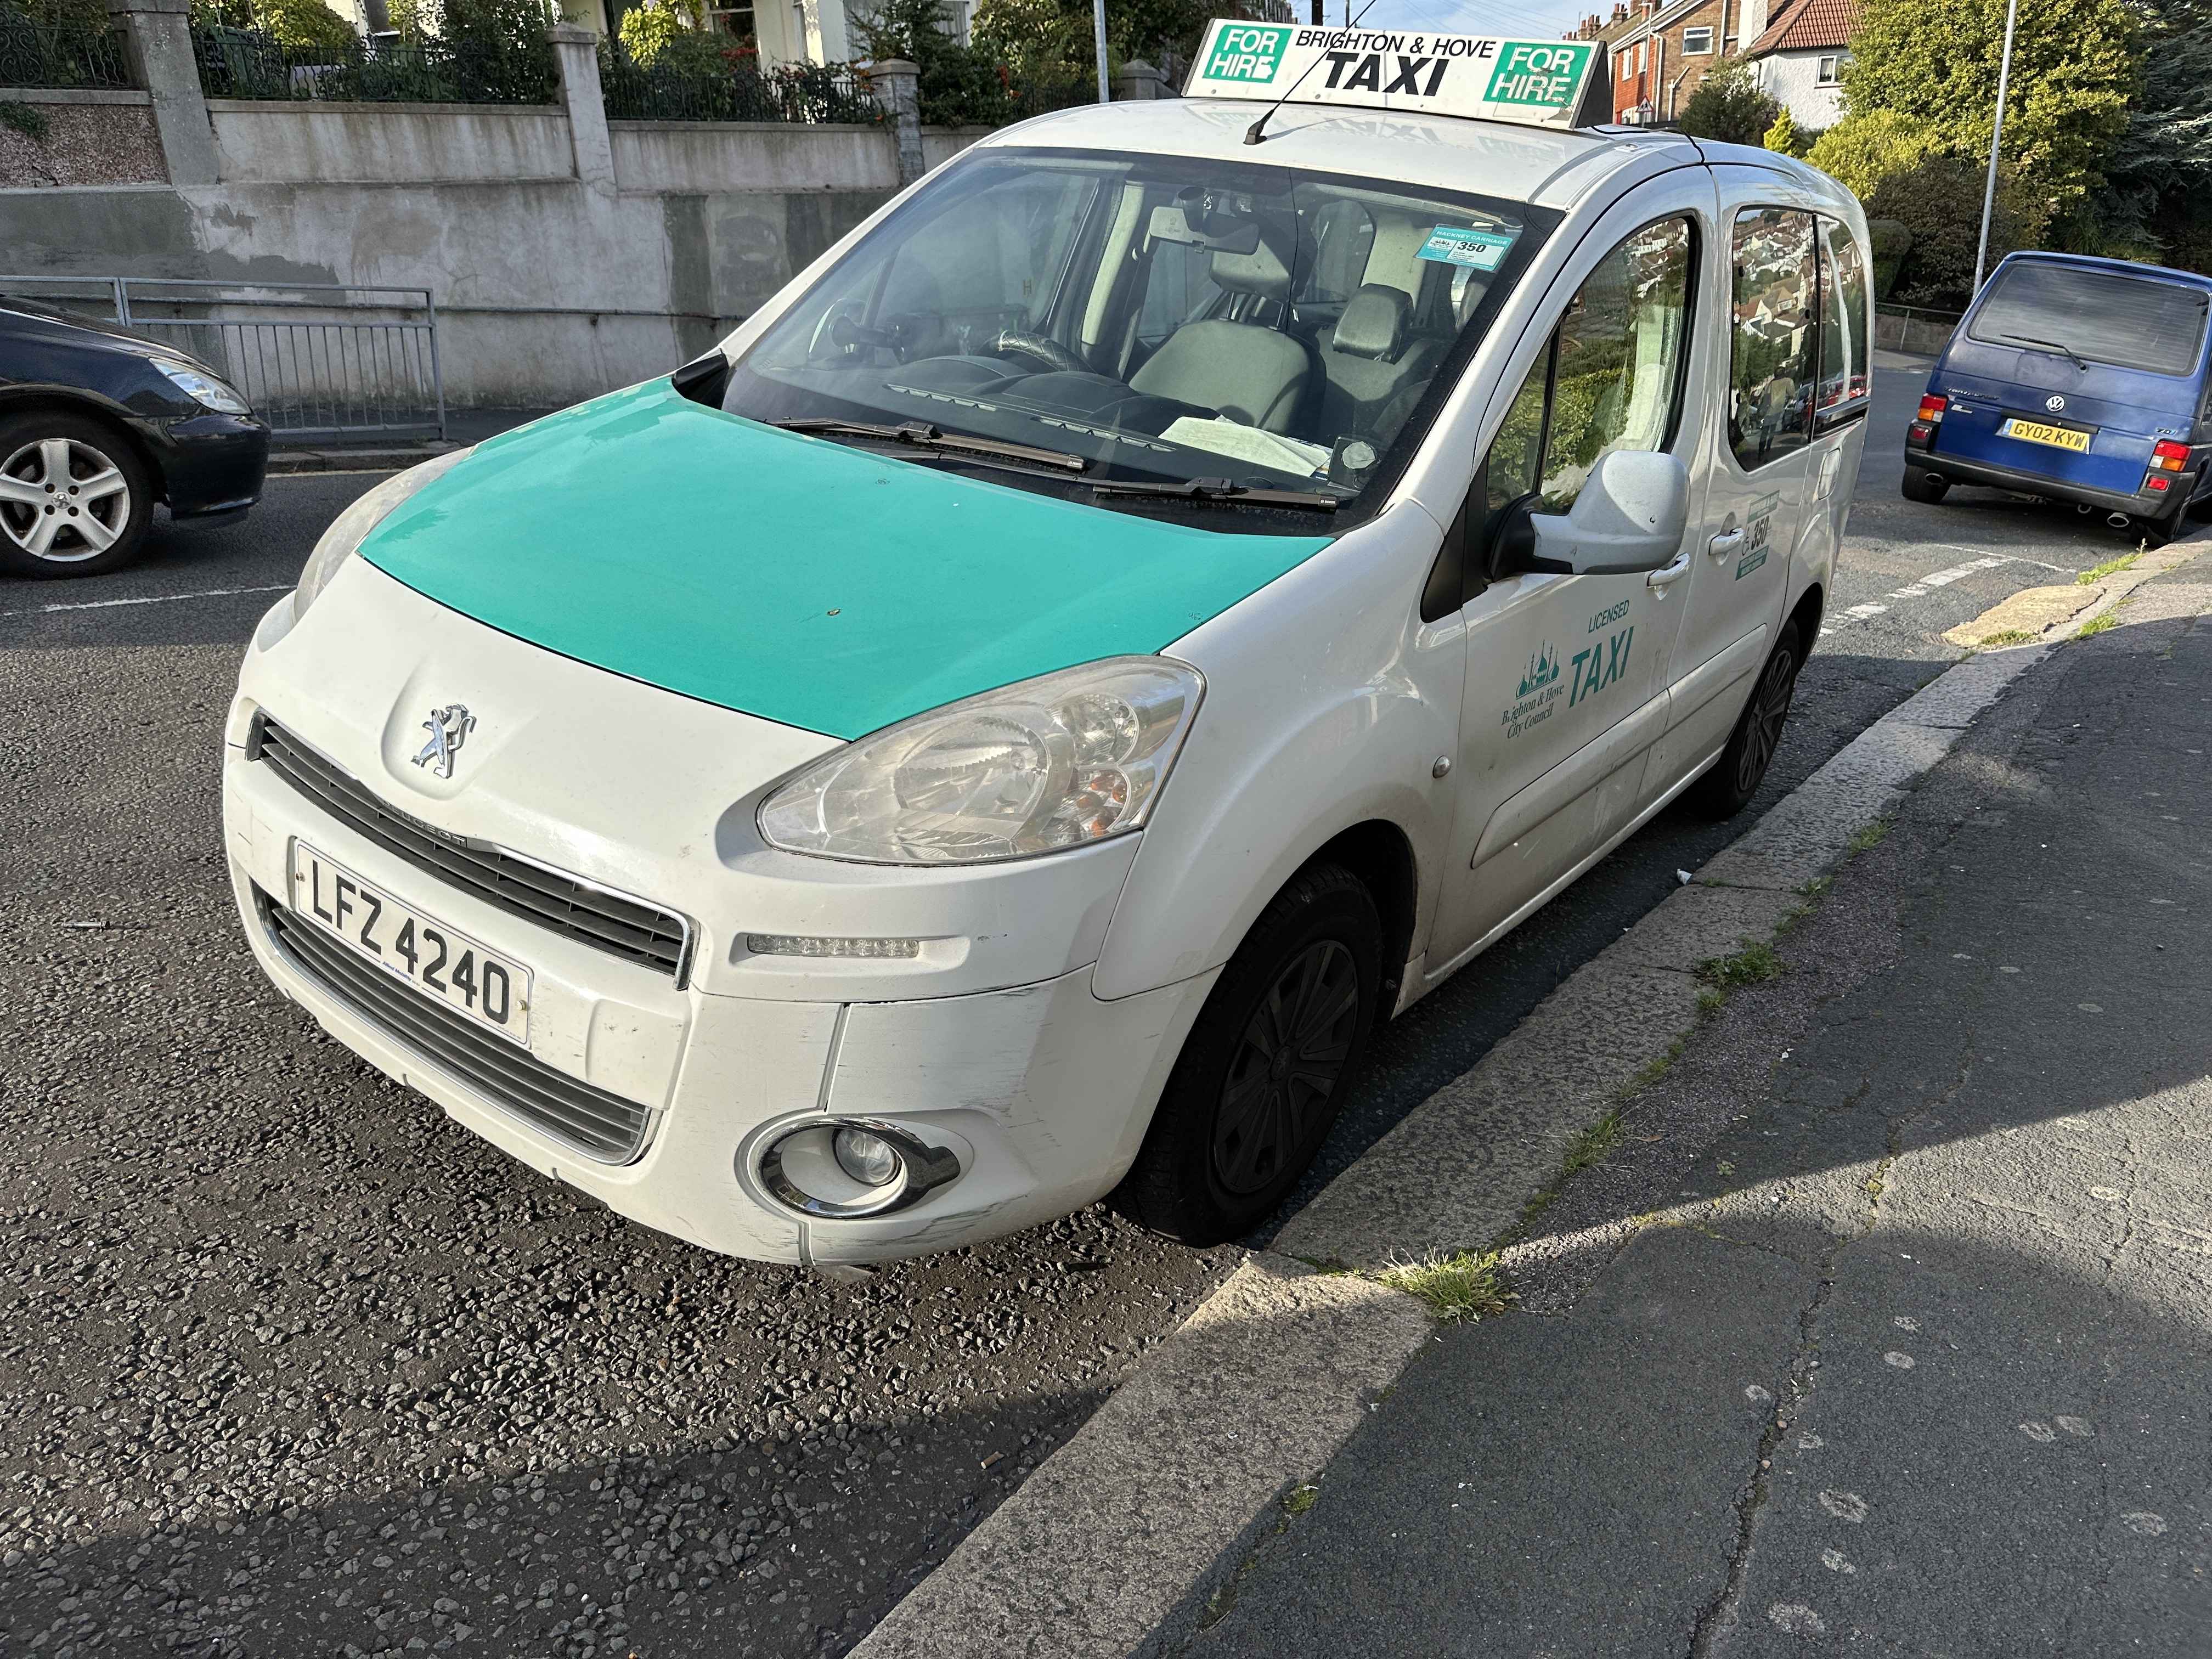 Photograph of LFZ 4240 - a White Peugeot Partner taxi parked in Hollingdean by a non-resident. The first of three photographs supplied by the residents of Hollingdean.